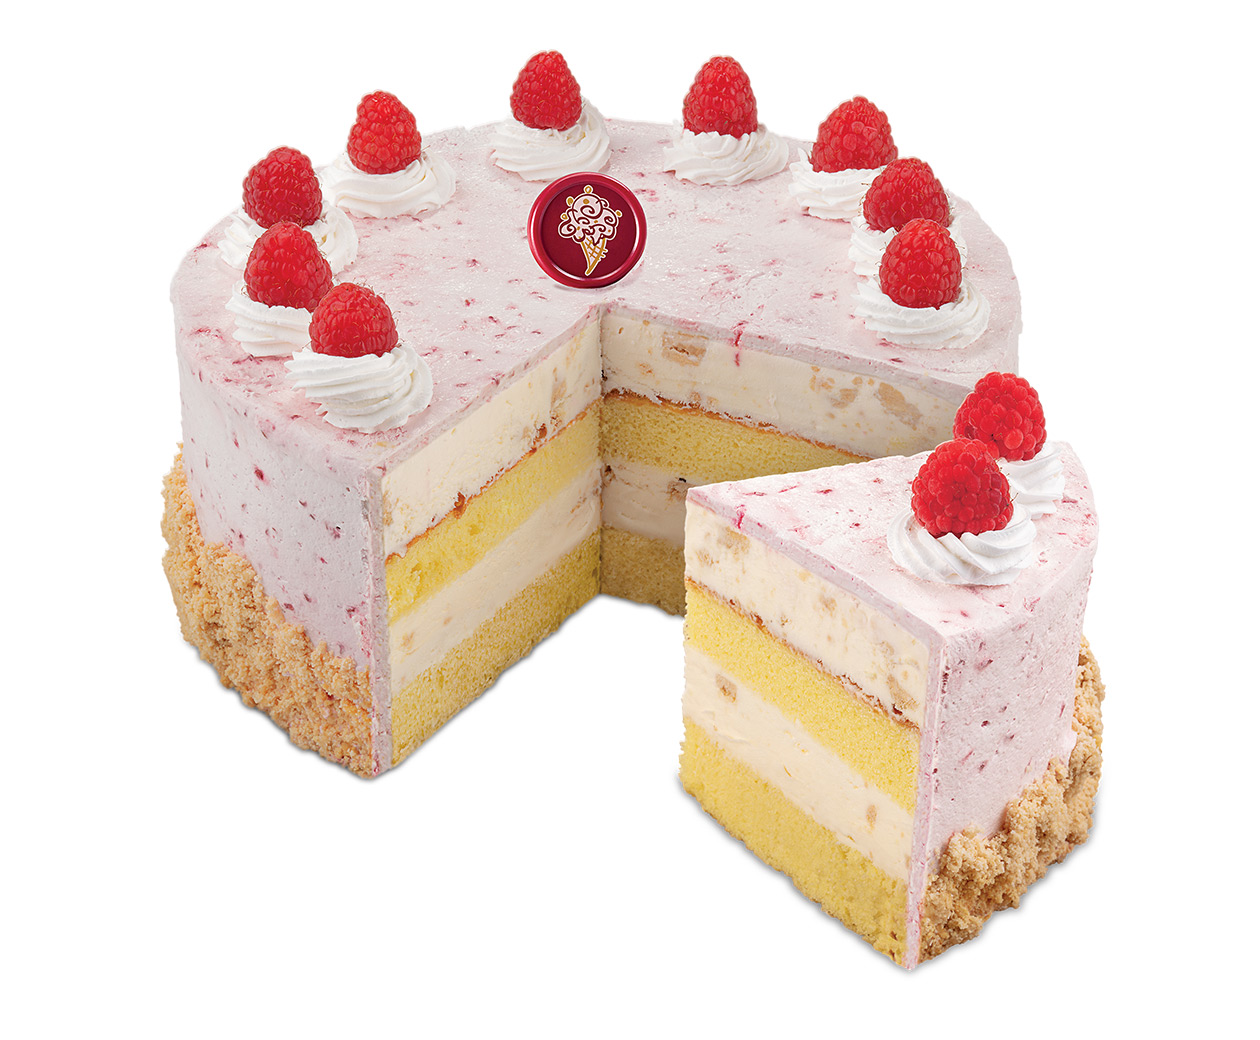 Buy Cream Stone Ice Cream Cake - Black Forest Online at Best Price of Rs  null - bigbasket